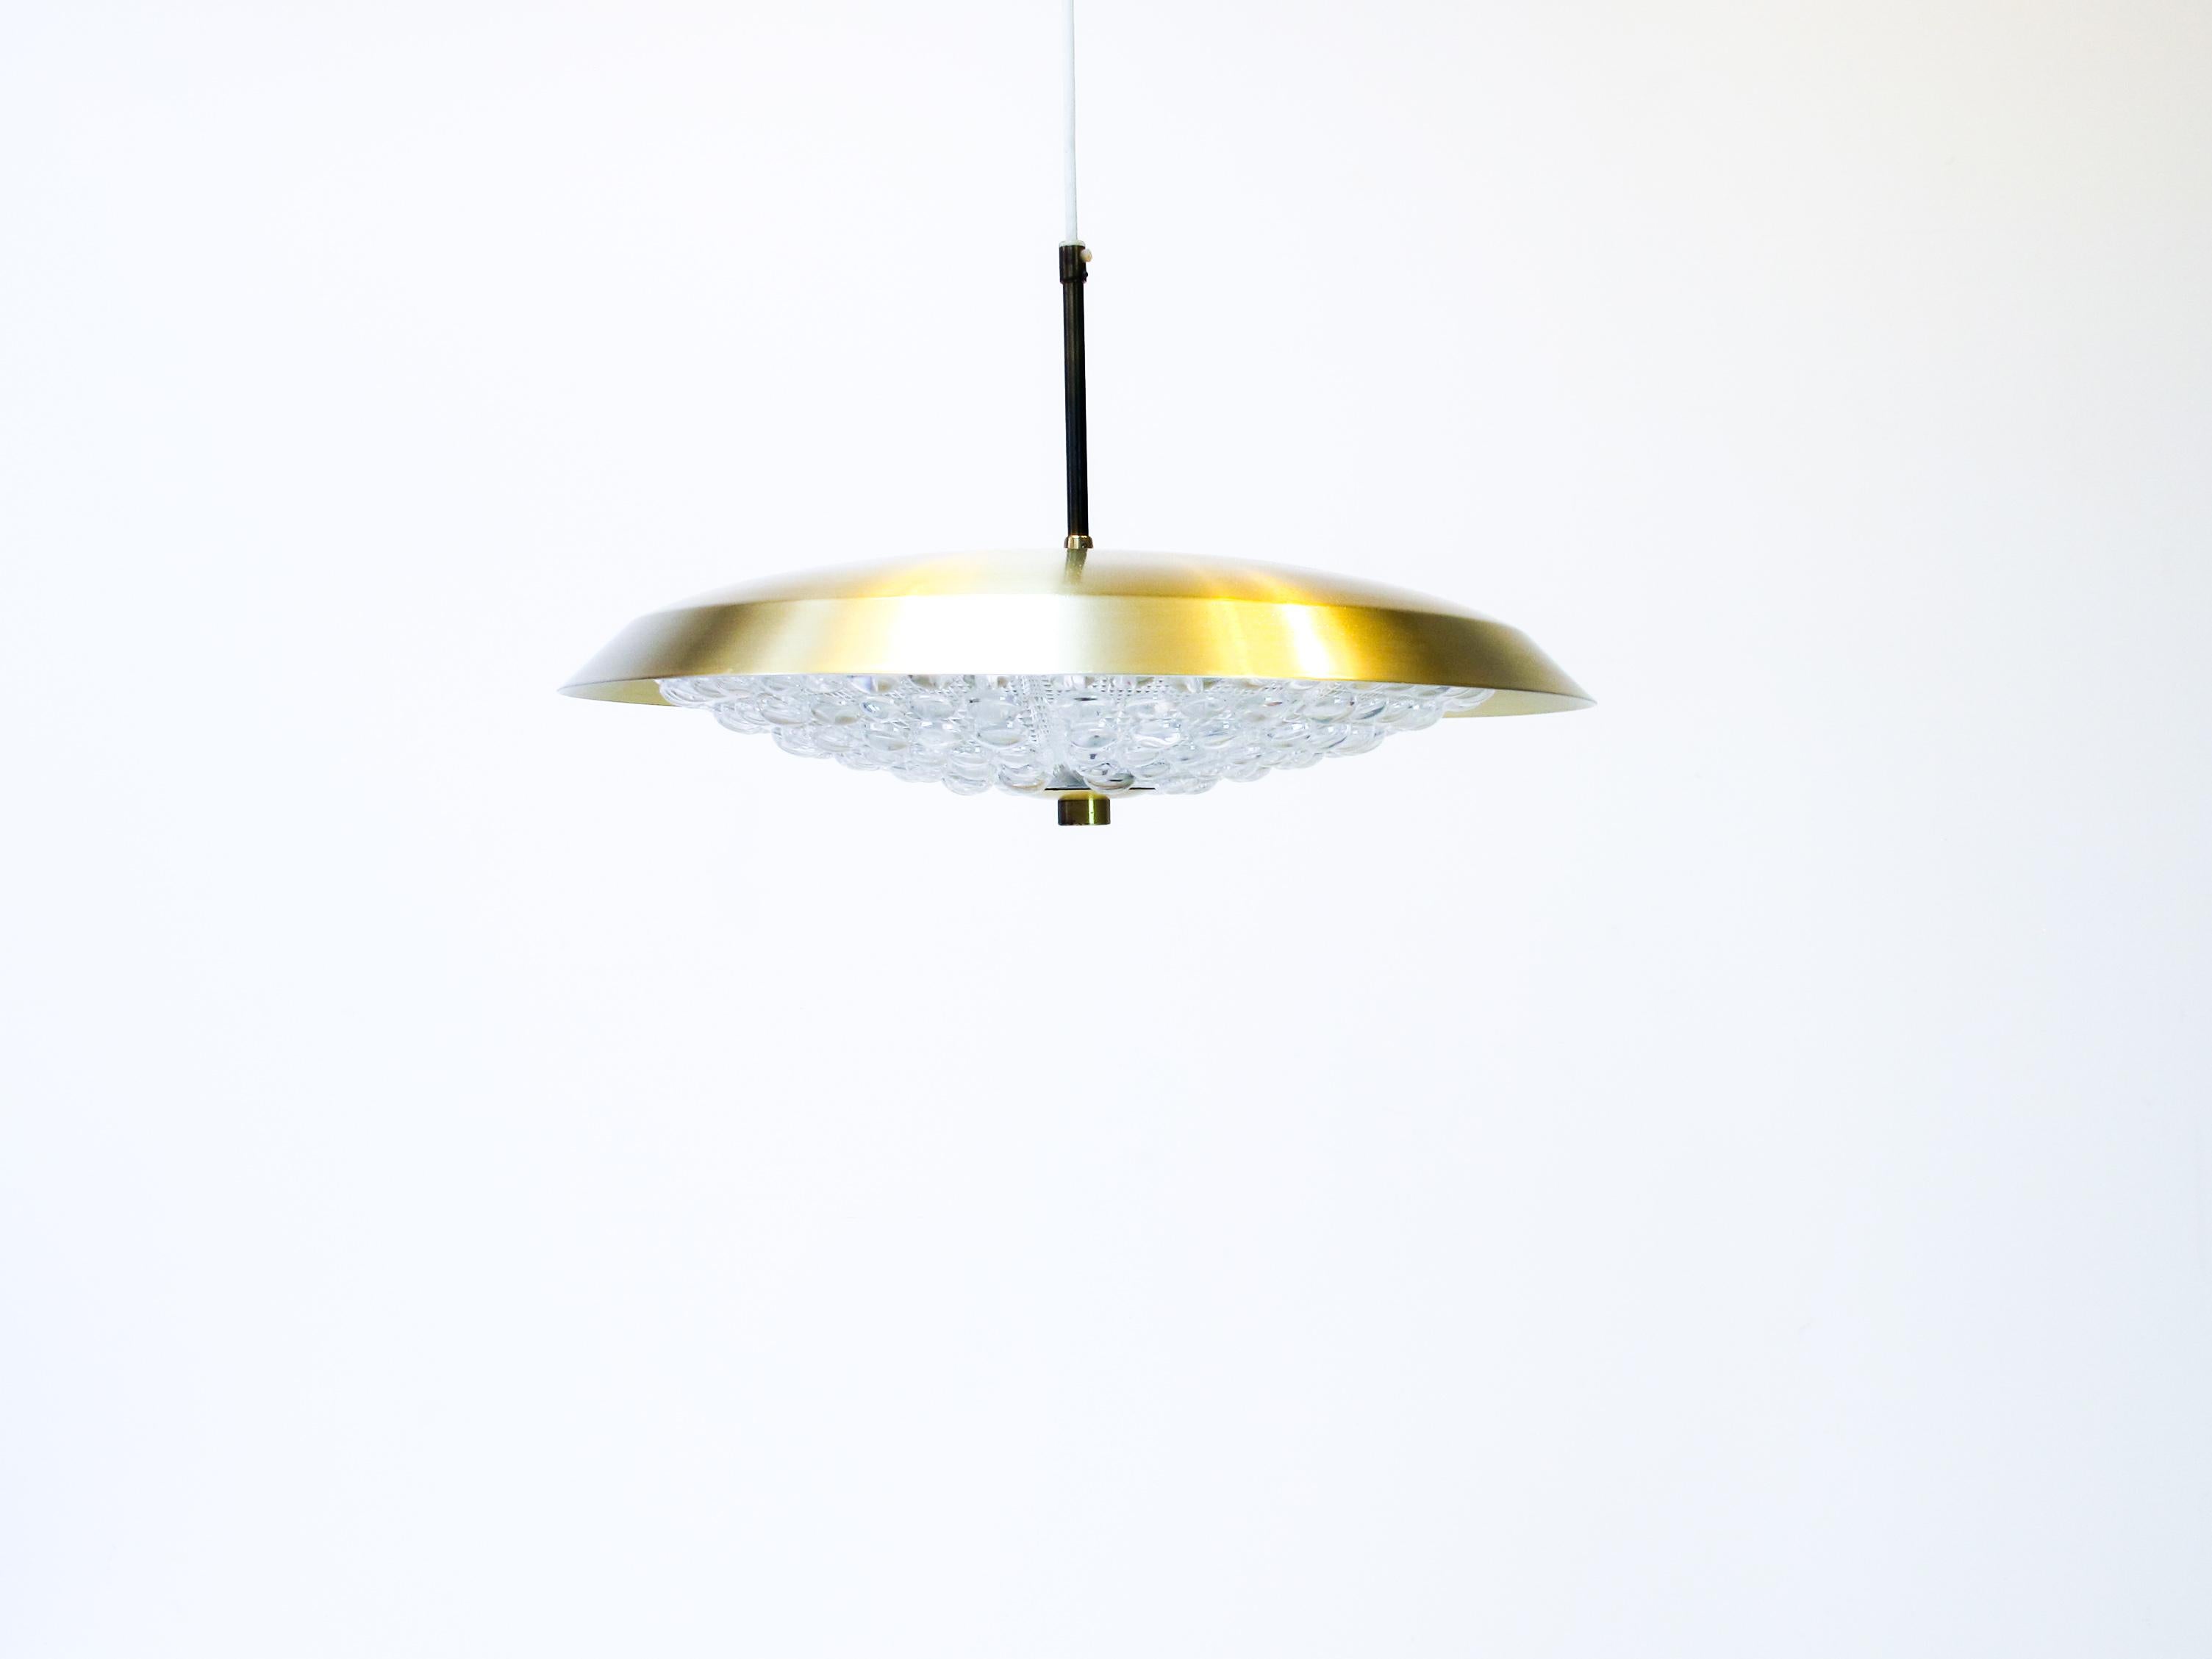 Pendant light designed by Carl Fagerlund.
This saucer top of the pendant are made of brass.